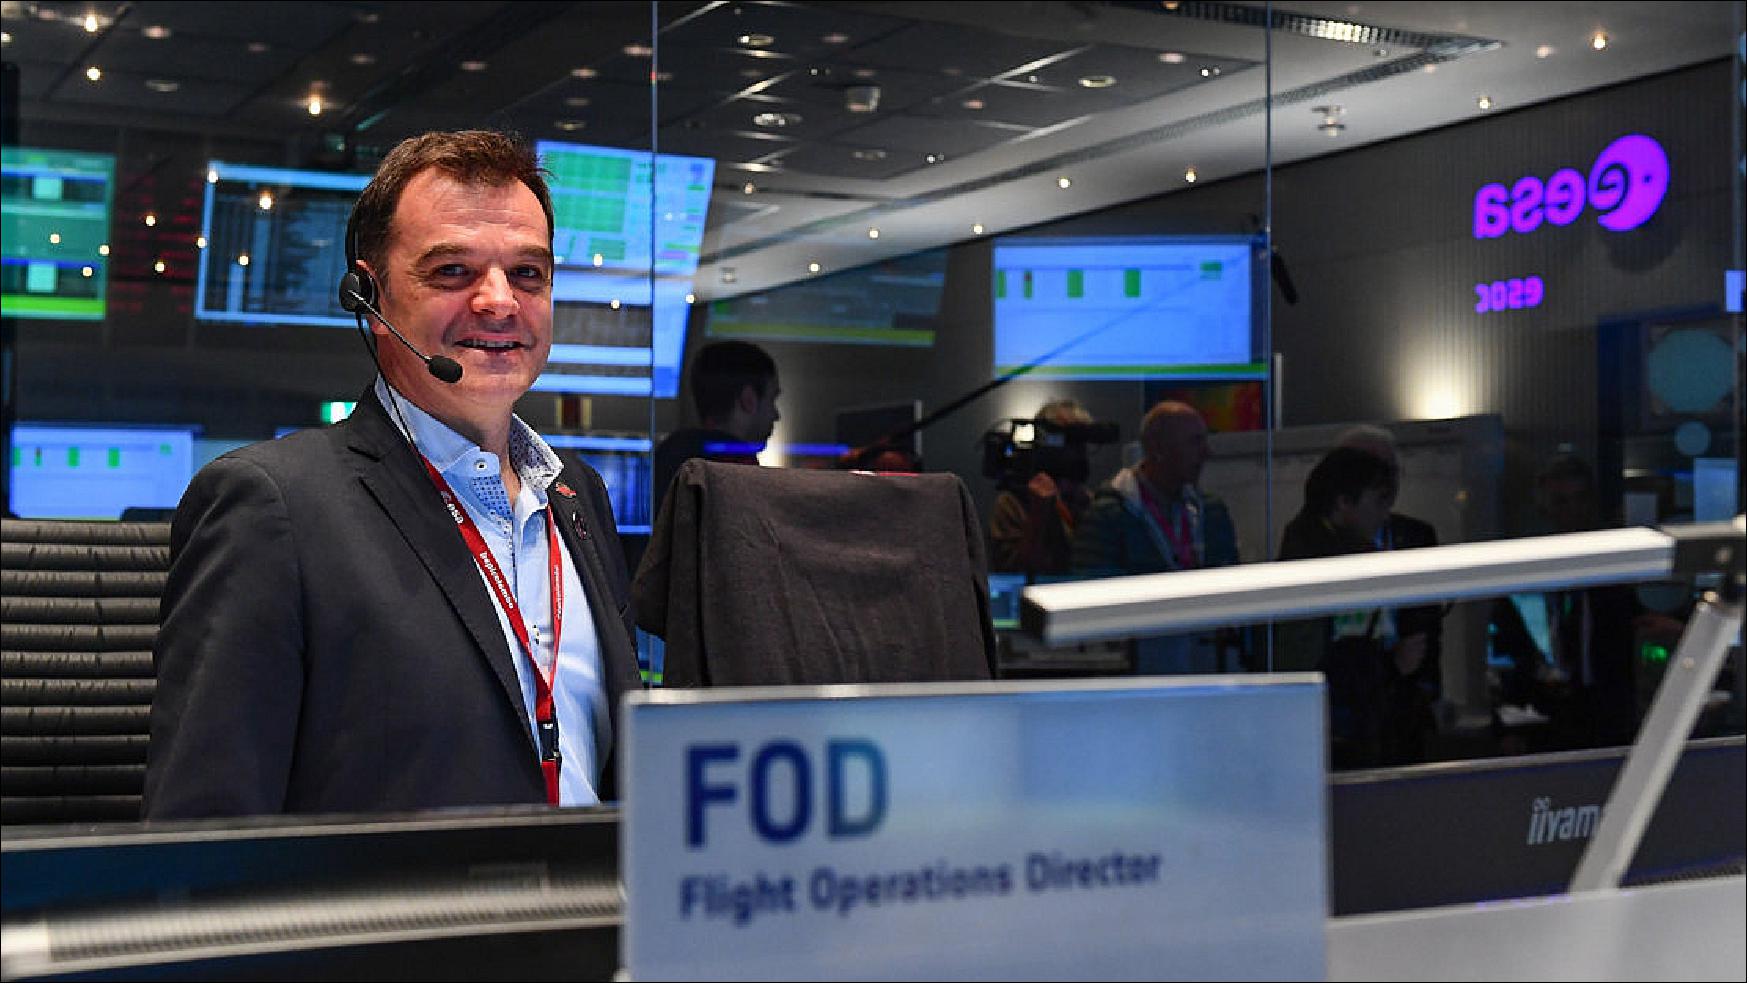 Figure 60: BepiColombo Flight Operations Director Andrea Accomazzo seen during launch in the main control room at ESA's ESOC control center on Saturday, 20 October, 2018 (image credit: ESA/J. Mai)